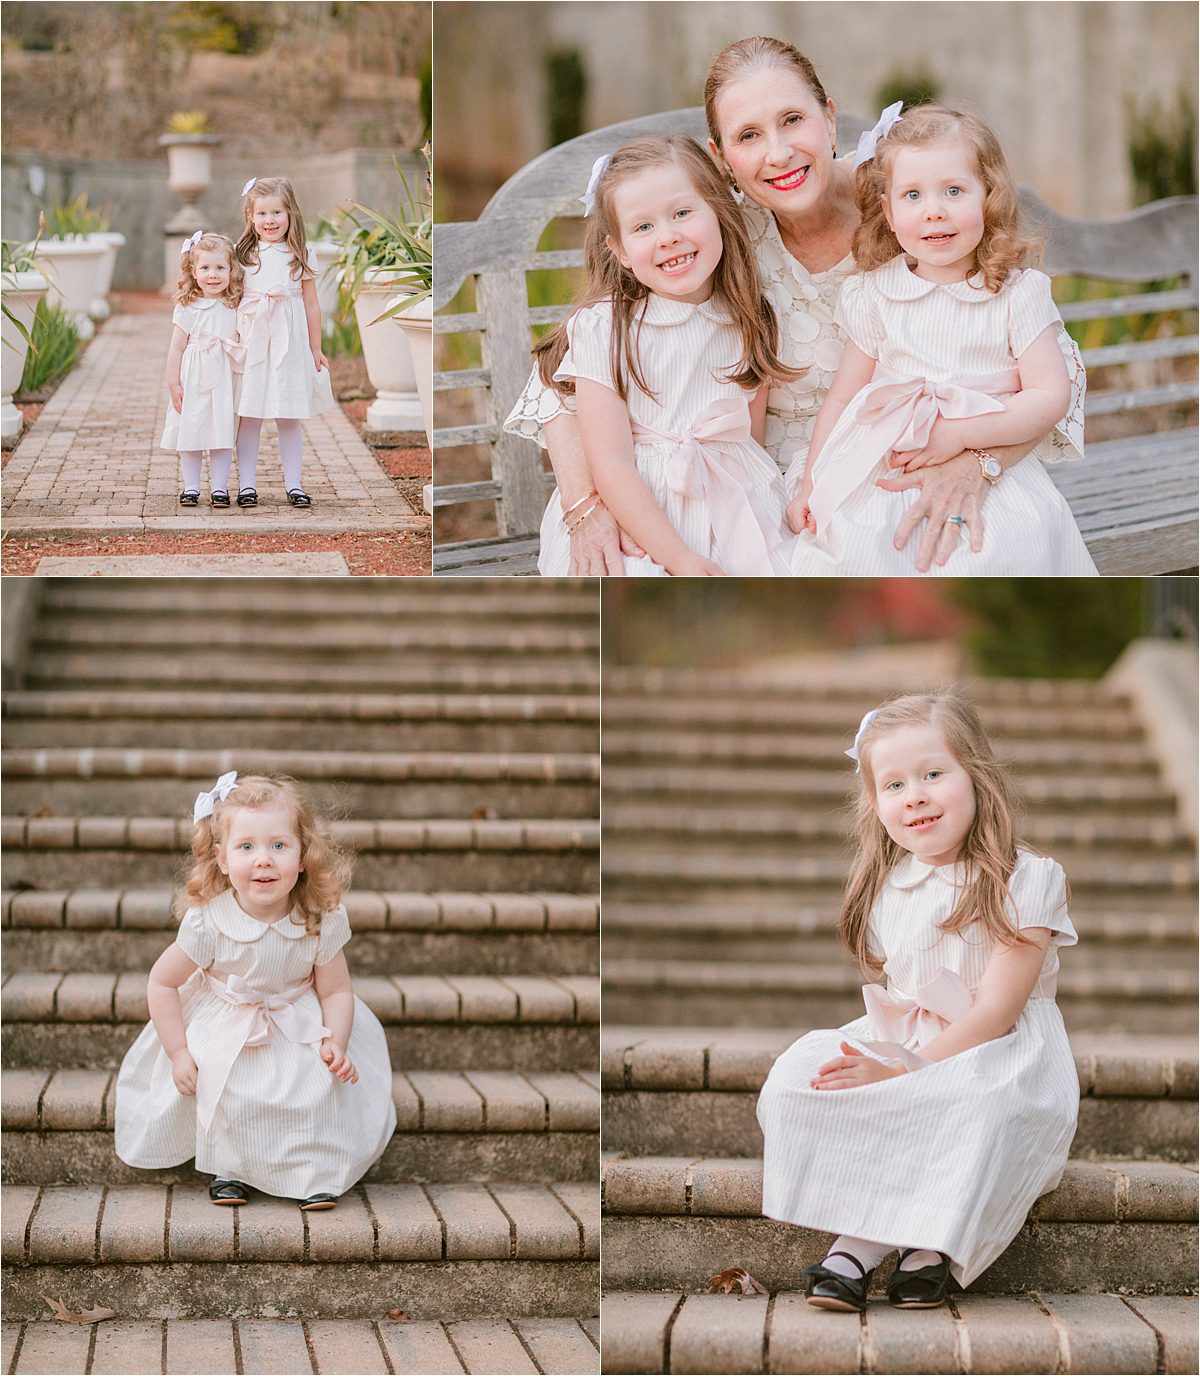 Athens, GA childrens photo session with grandmother at Botanical Gardens.